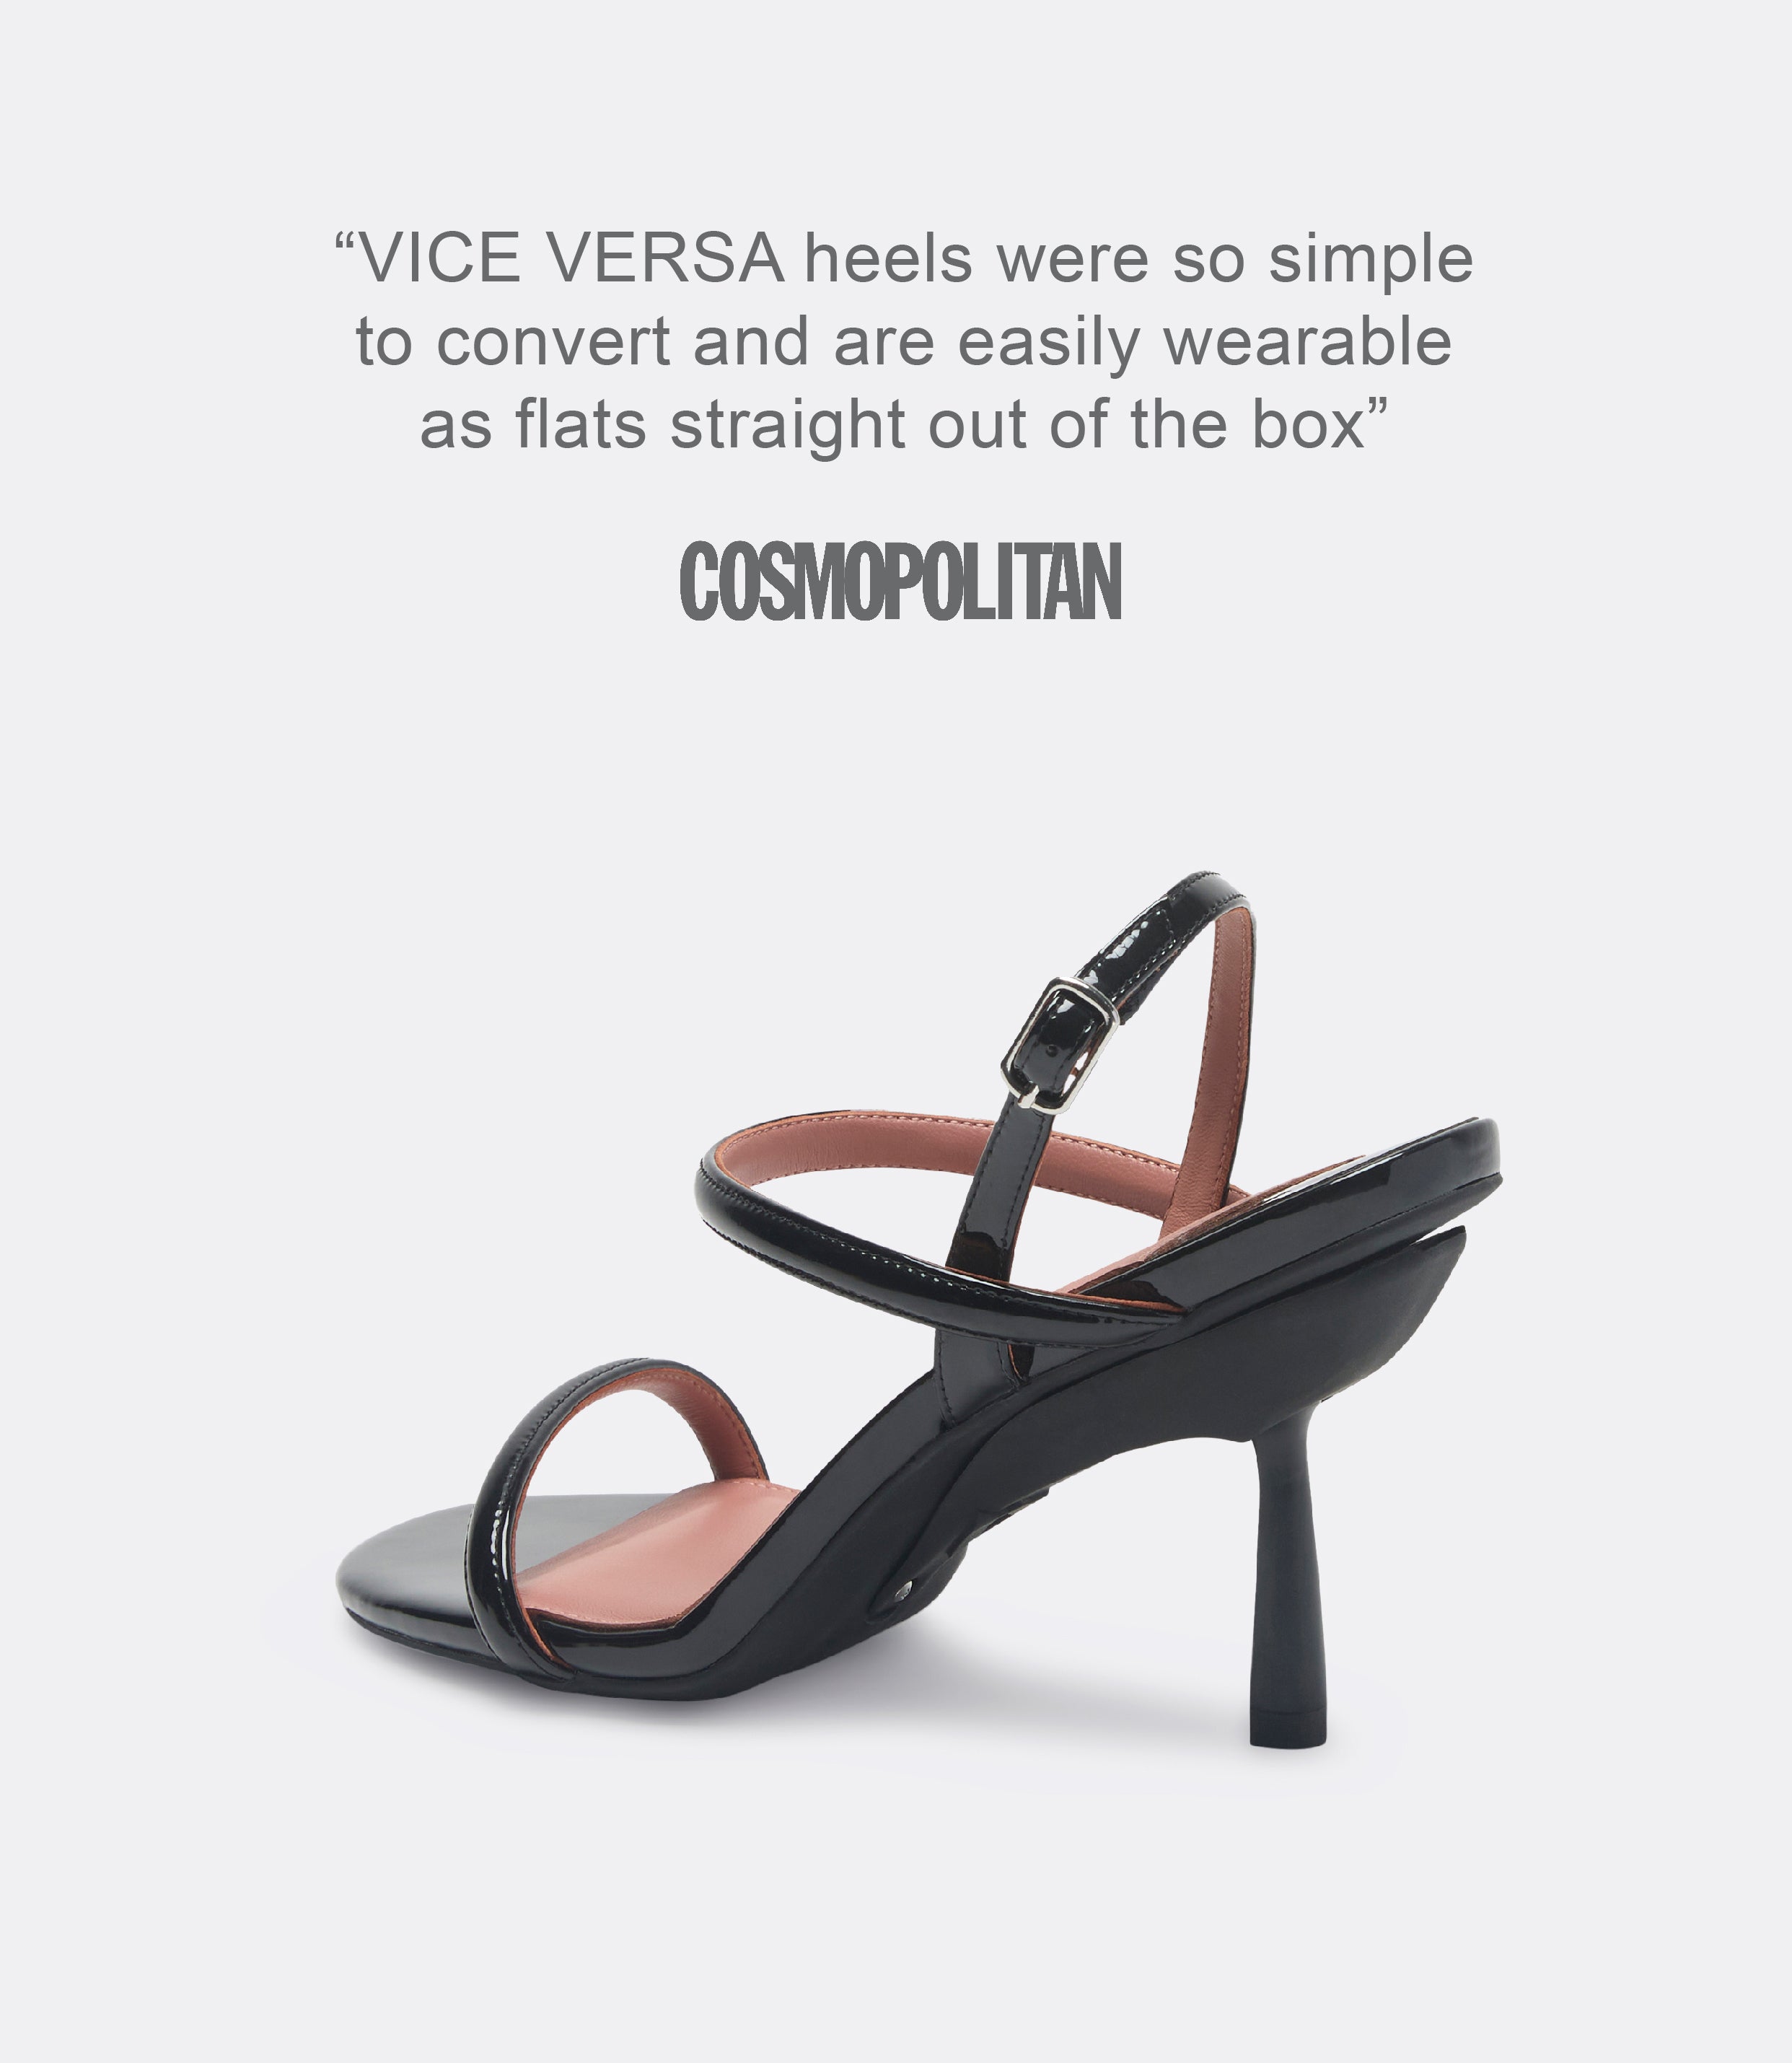 A quote from Cosmopolitan and a back view of a black leather heel.